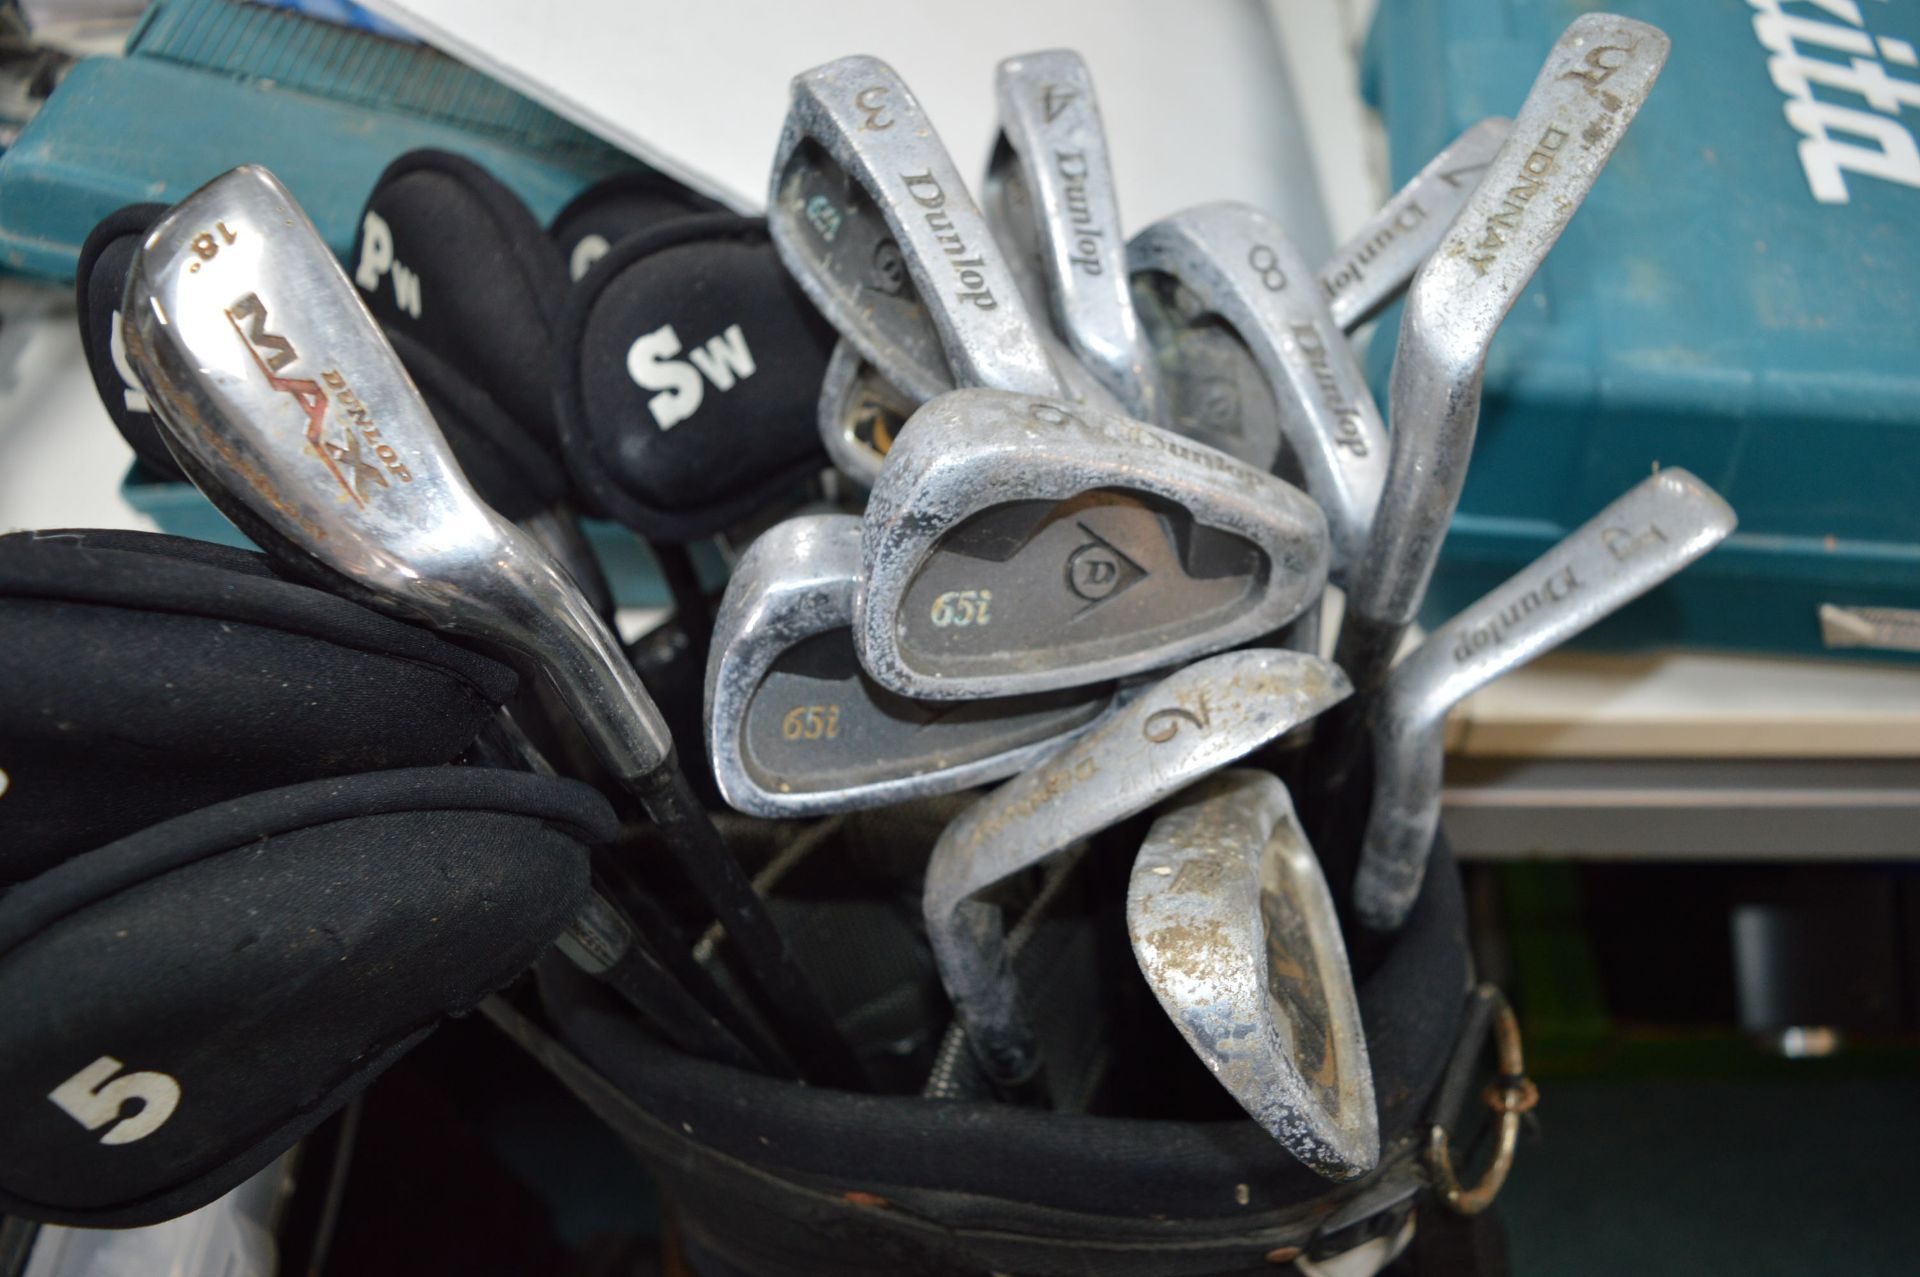 Dunlop Golf Bag and Assorted Golf Clubs - Image 2 of 2